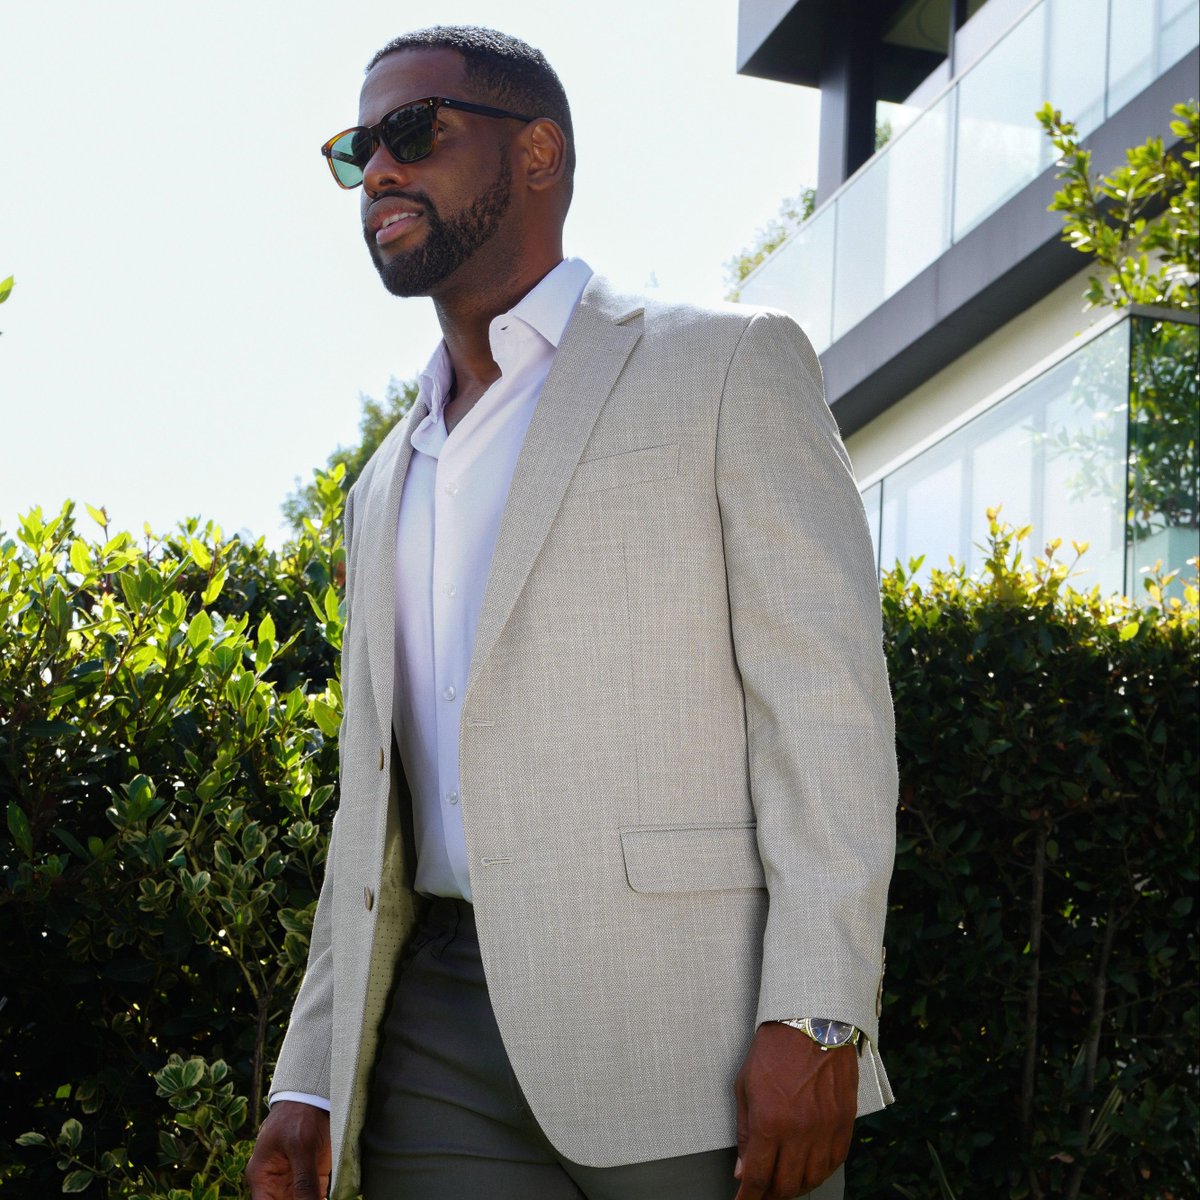 Whether it's a #graduation, #wedding, or any special event, we've got you covered with Collection by Michael Strahan™. Find your perfect outfit exclusively at @jcpenney. ☀️👔 #SummerStyle #MichaelStrahanCollection #JCP l8r.it/g3bQ